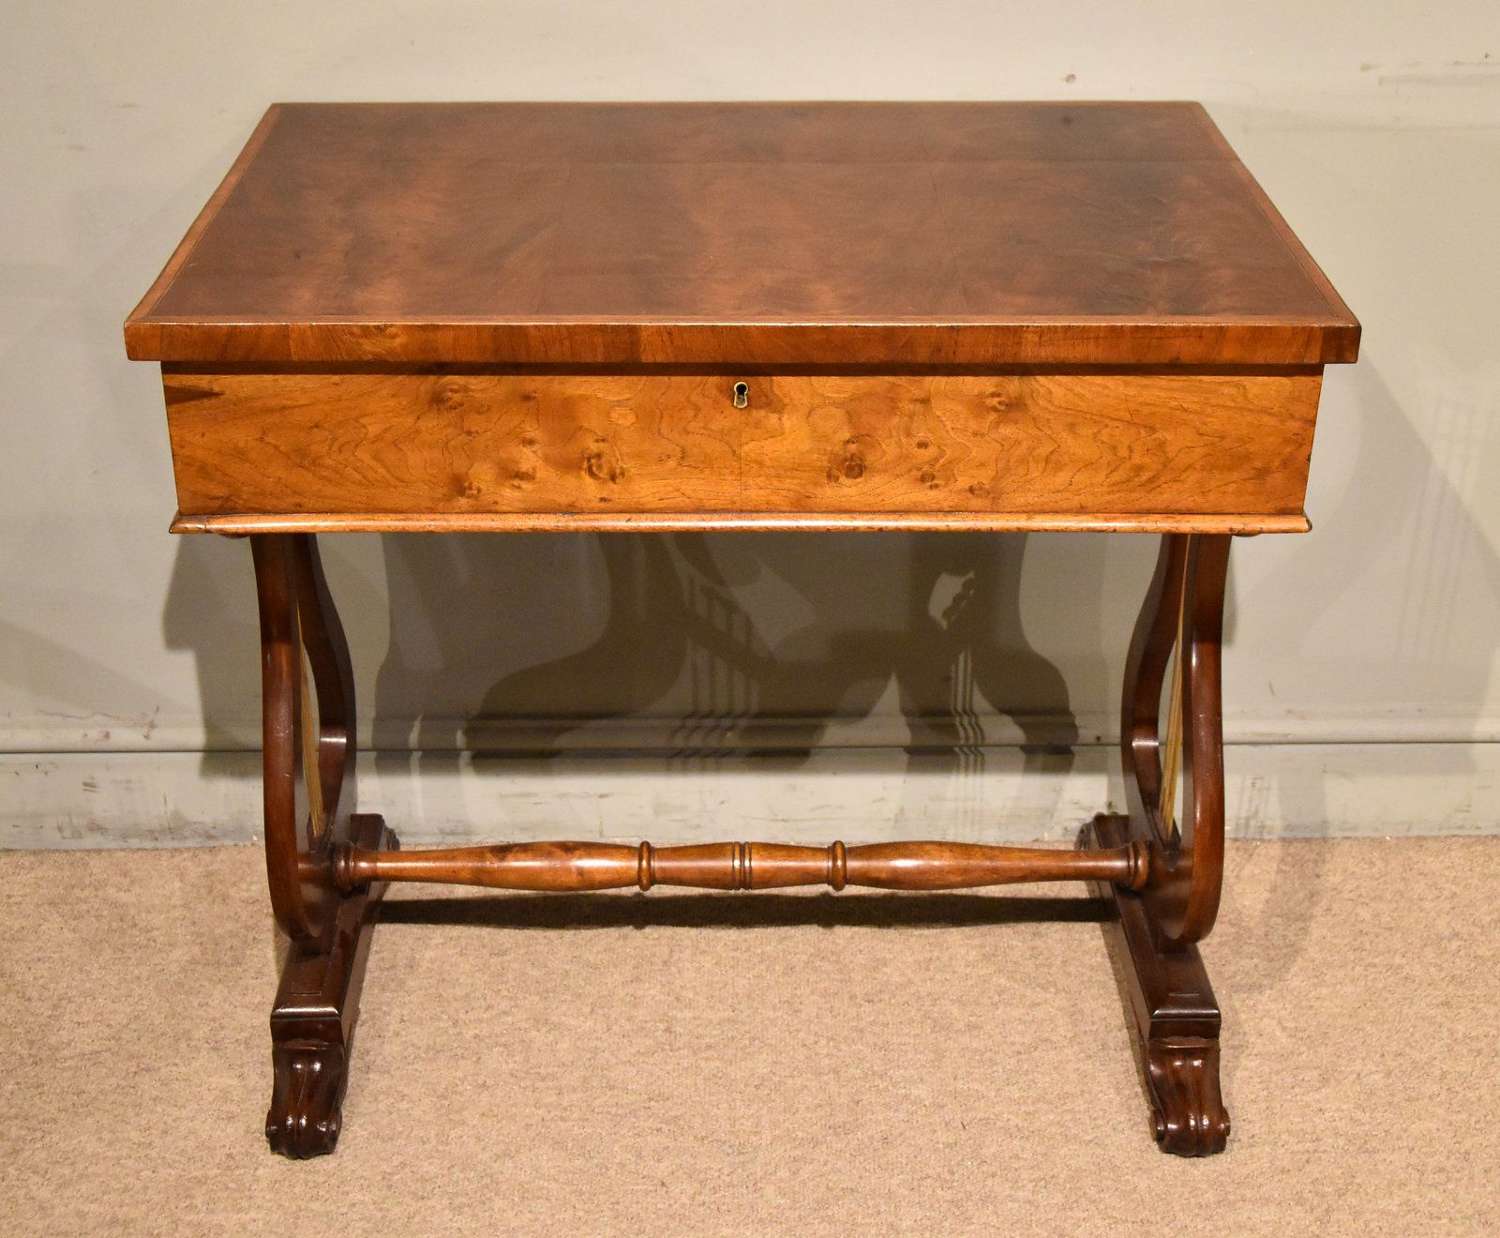 Regency period side table with flamed mahogany top